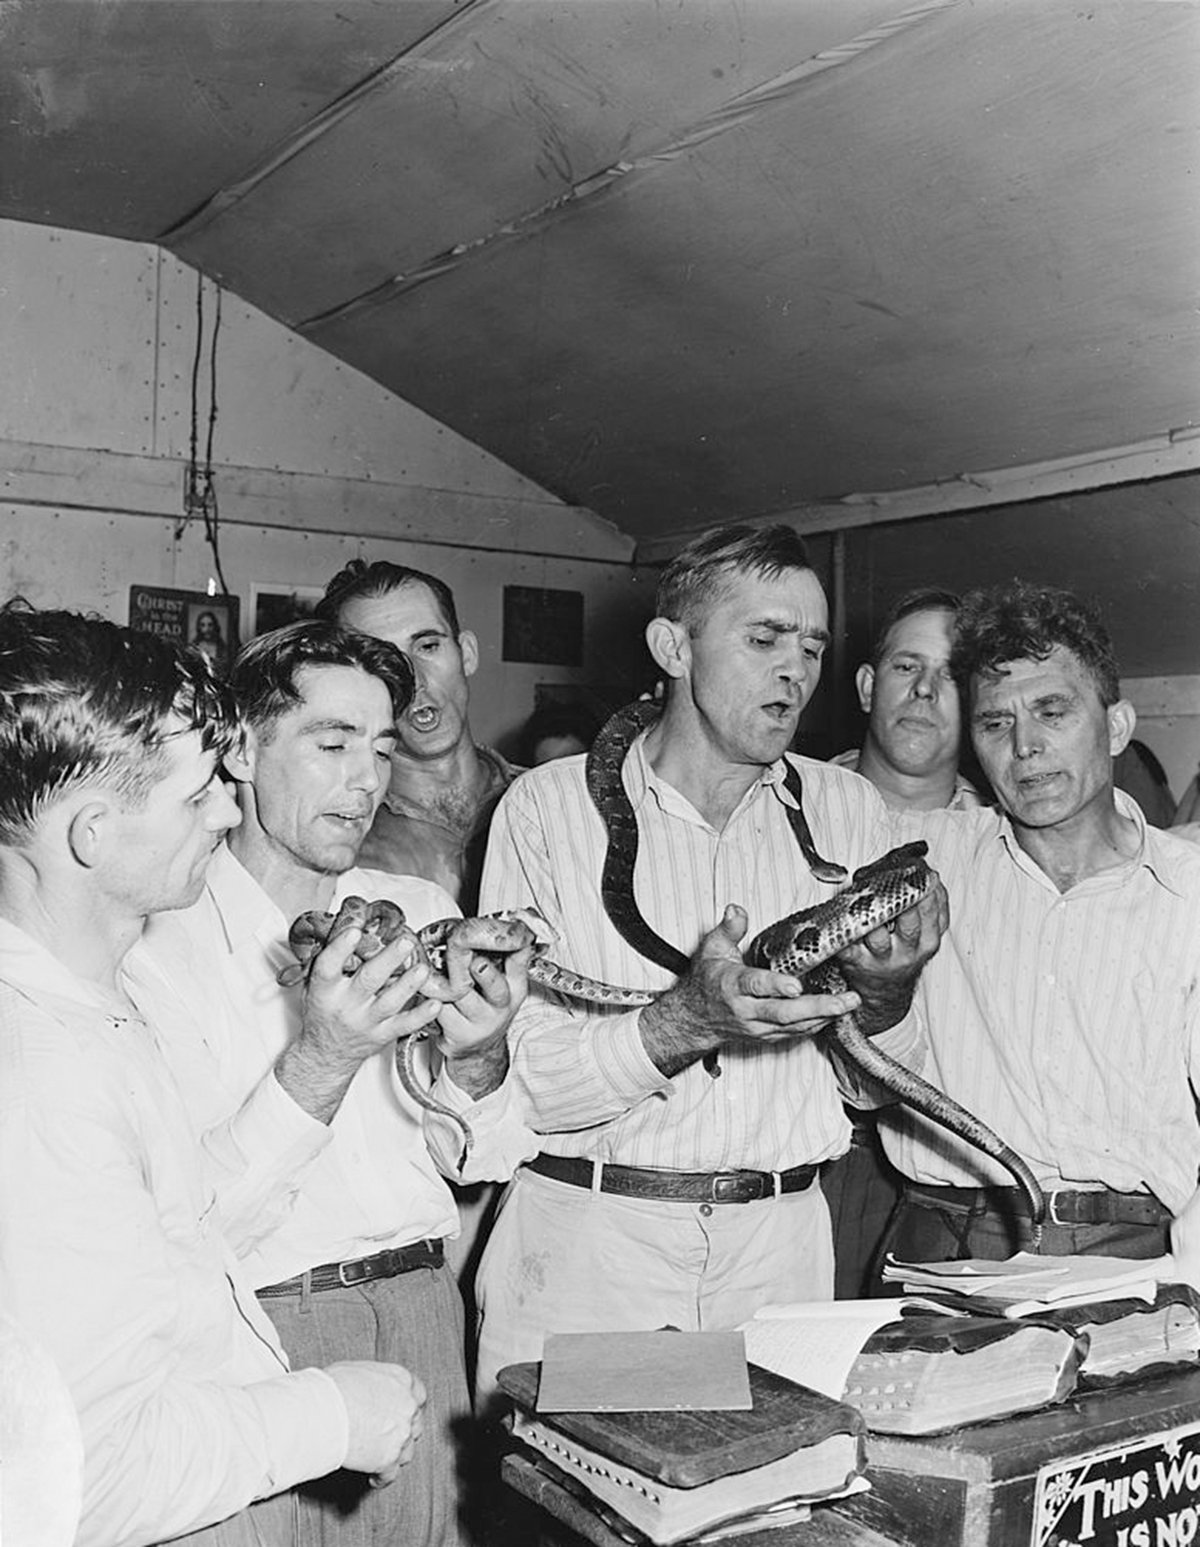 Black and white photograph from September 15, 1946, taken by Russell Lee, depicting a group of men inside a snake-handling church in Lejunior, Kentucky. The men, dressed in formal attire, are intently handling and observing serpents. A table in the foreground holds several open books, with a partially visible sign on the table's side. 